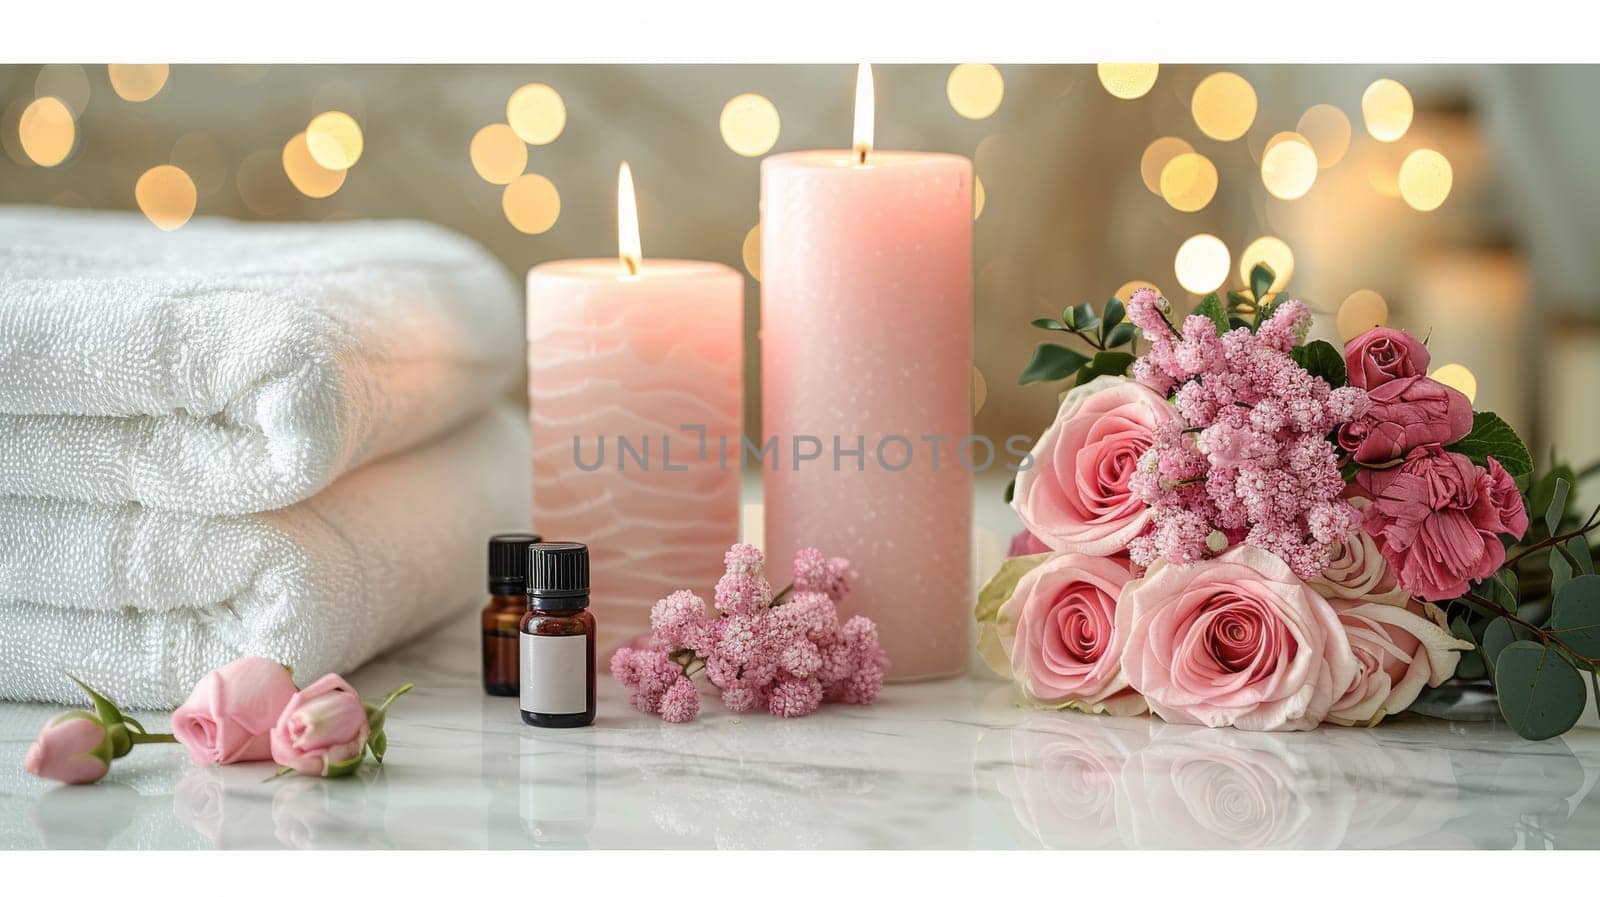 A set of white towels are stacked on top of each other, with a candle and a vase of flowers in between. Concept of relaxation and comfort, as the towels and candles suggest a spa-like atmosphere